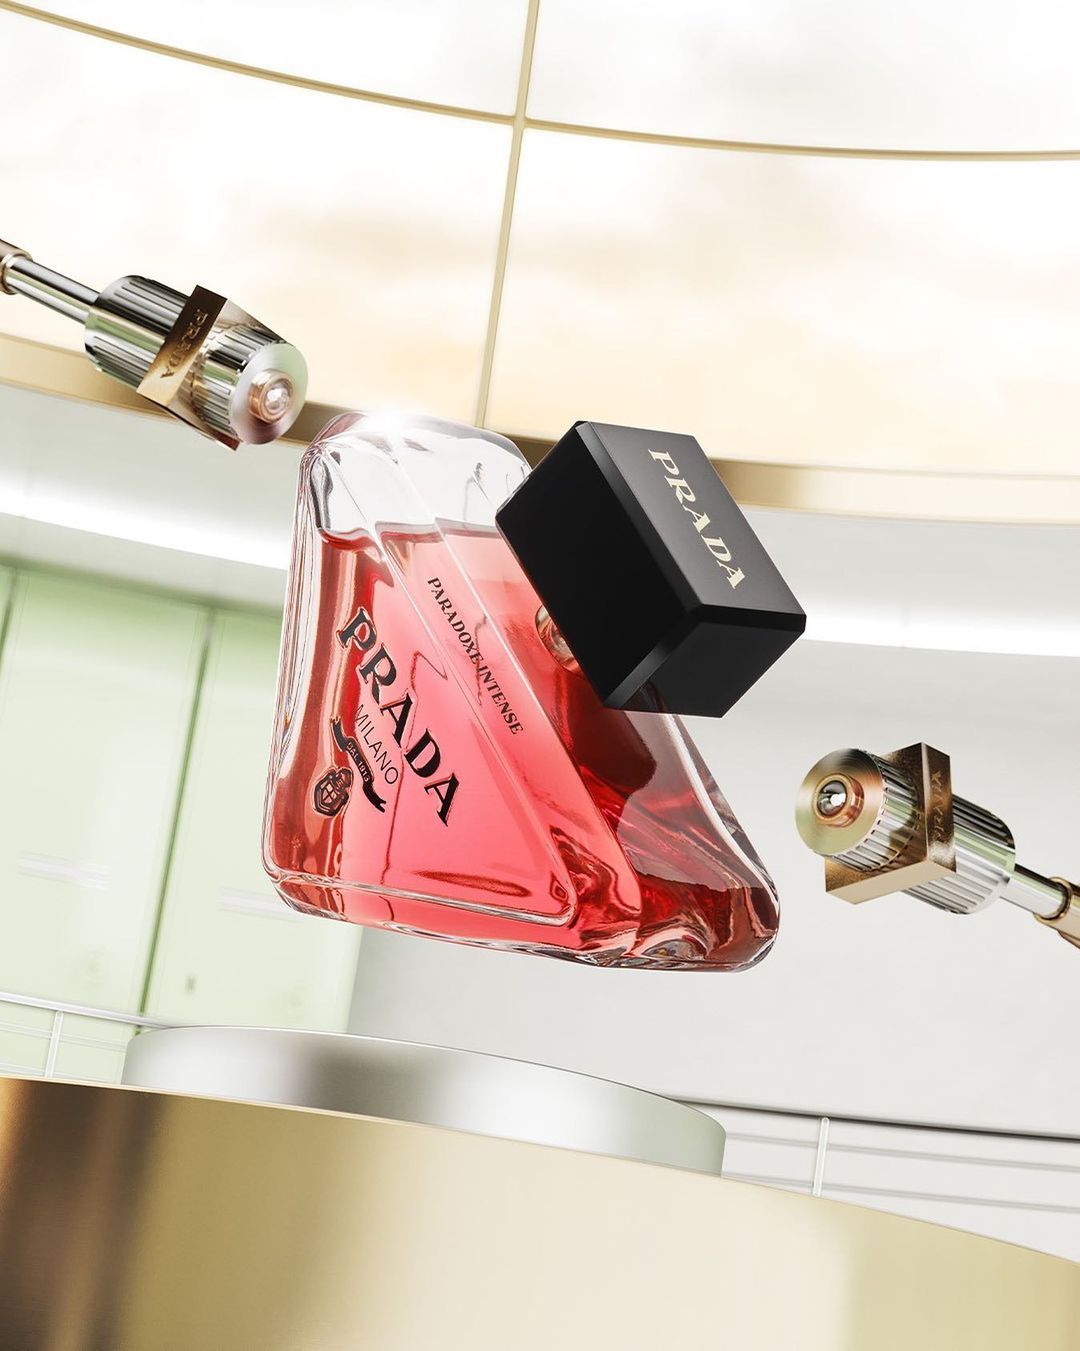 Prada’s Paradoxe, one of the most coveted luxury fragrances